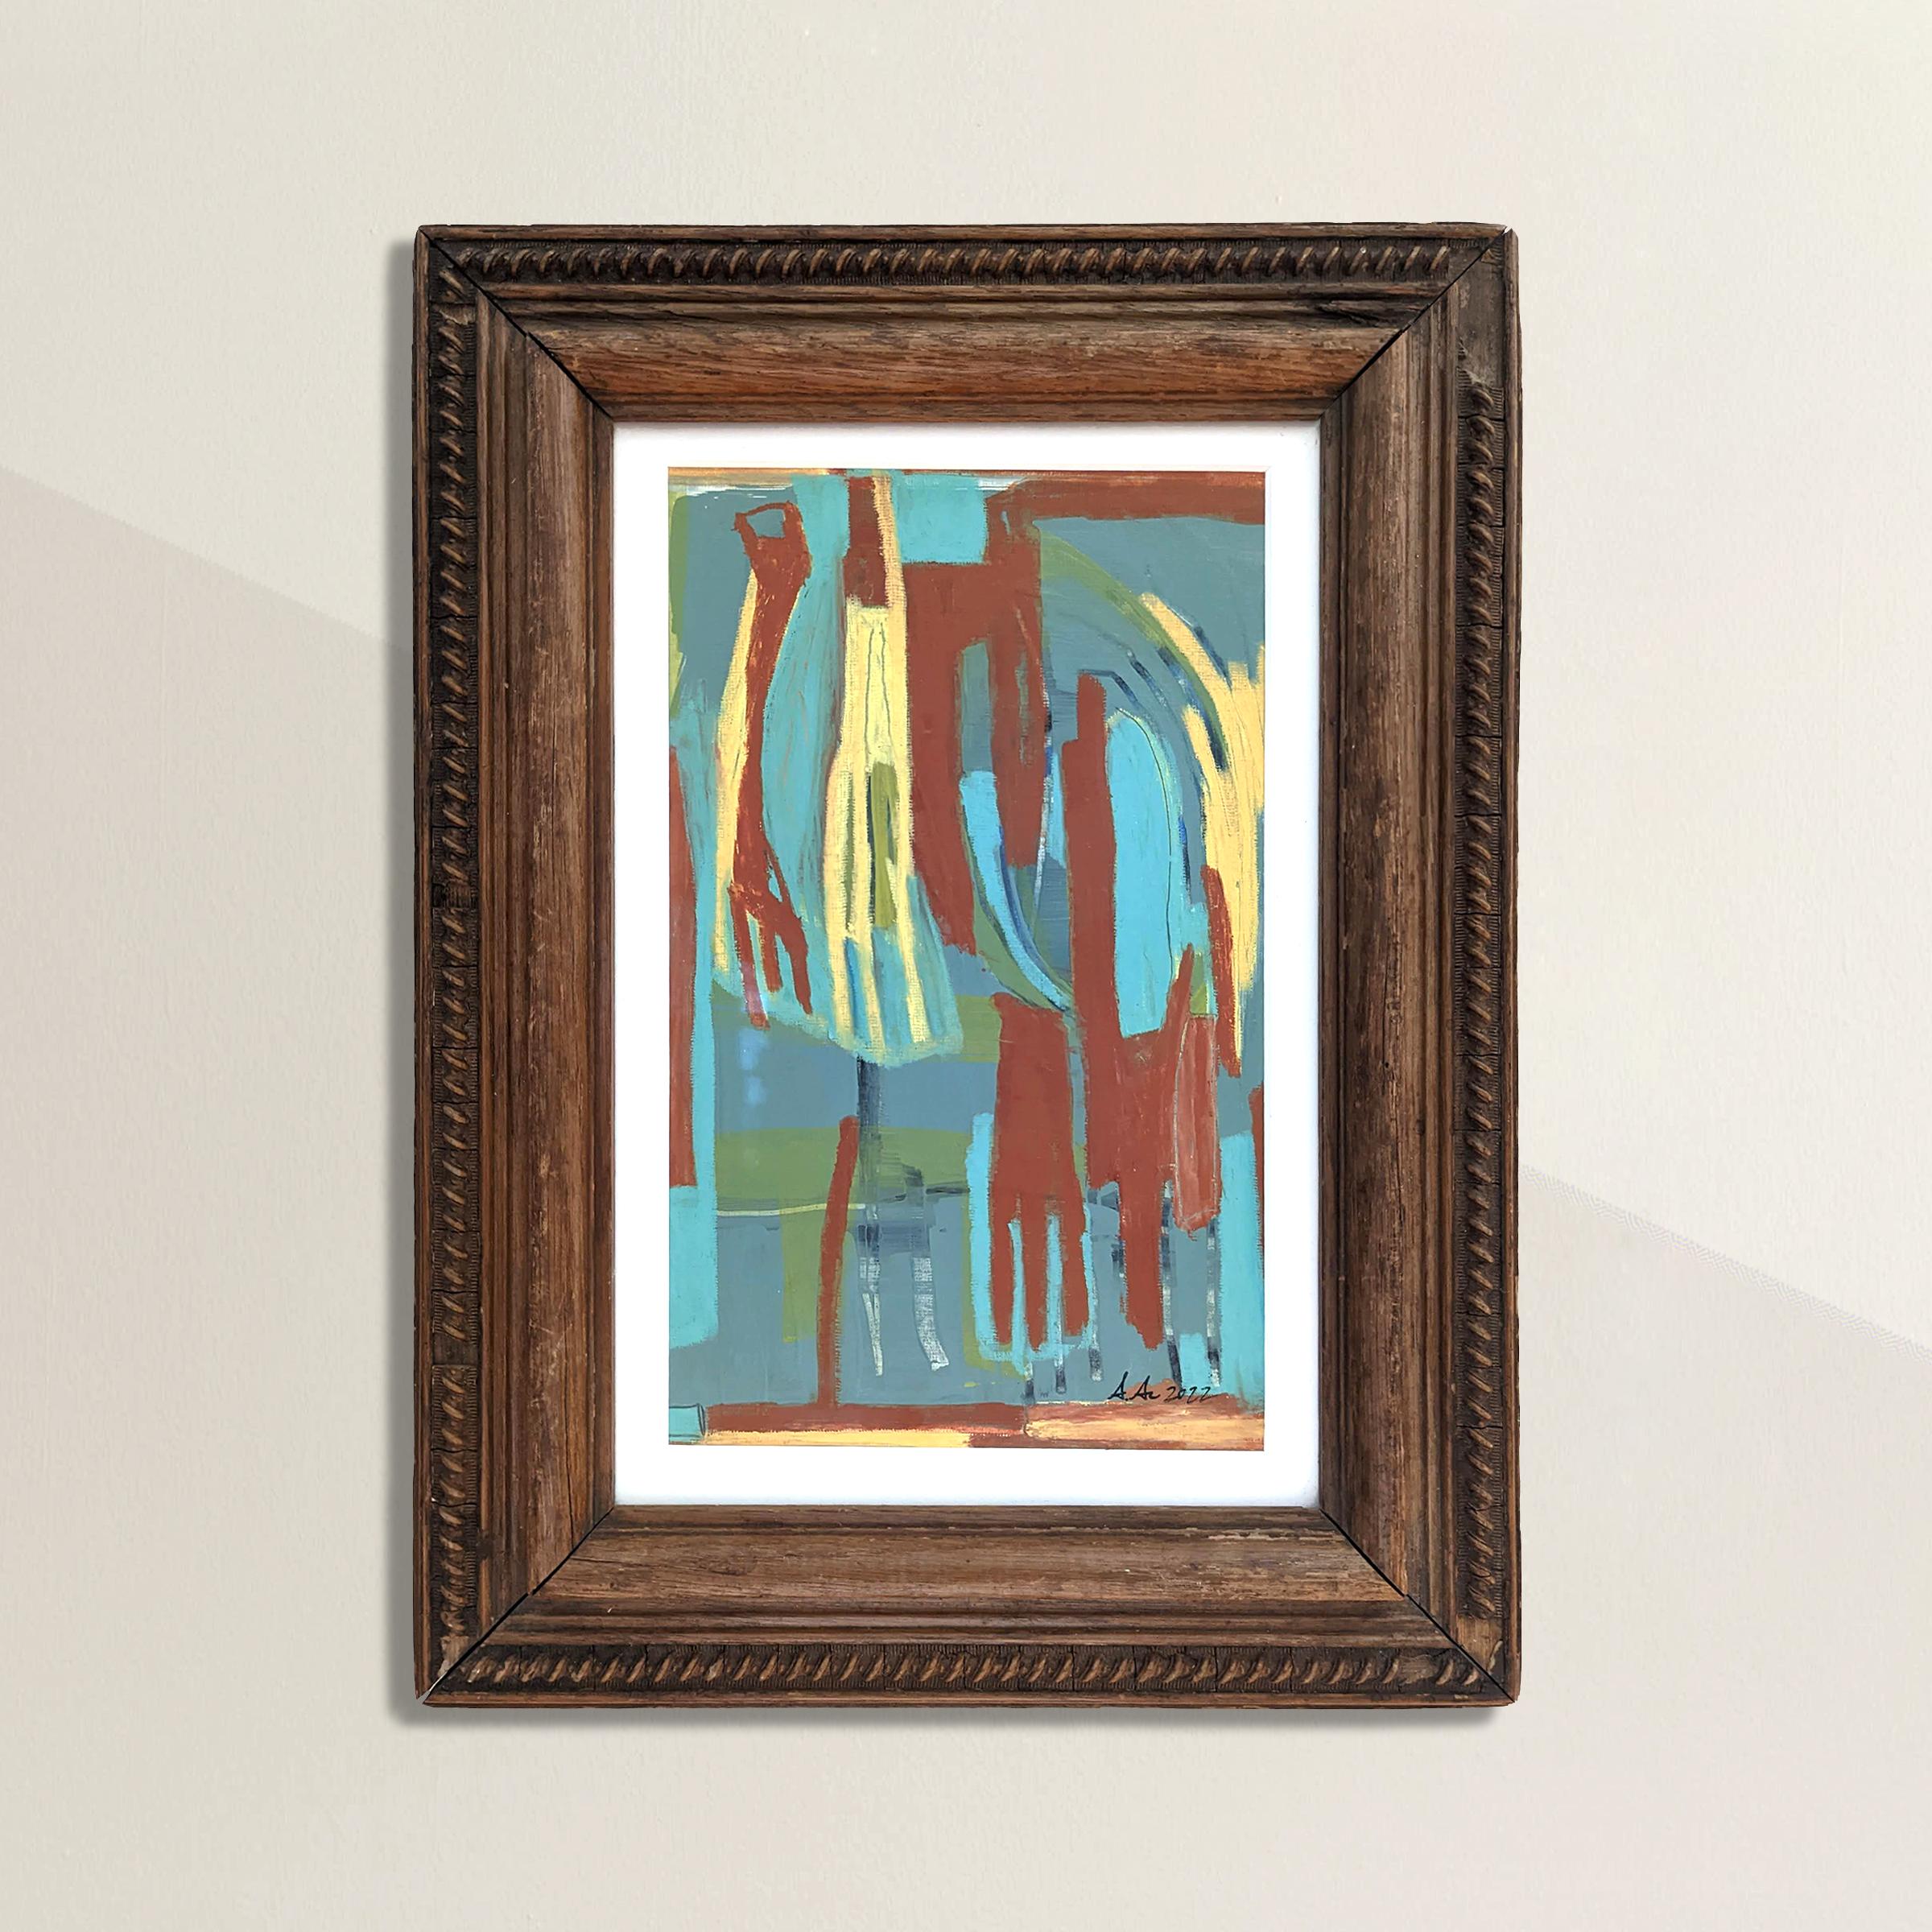 A striking acrylic and wax pastel abstract figurative painting on paper by Anne Abueva, and framed in a found vintage frame.

A decade ago interior designer Anne Abueva put down her paint deck and picked up a paintbrush. Her signature expressive